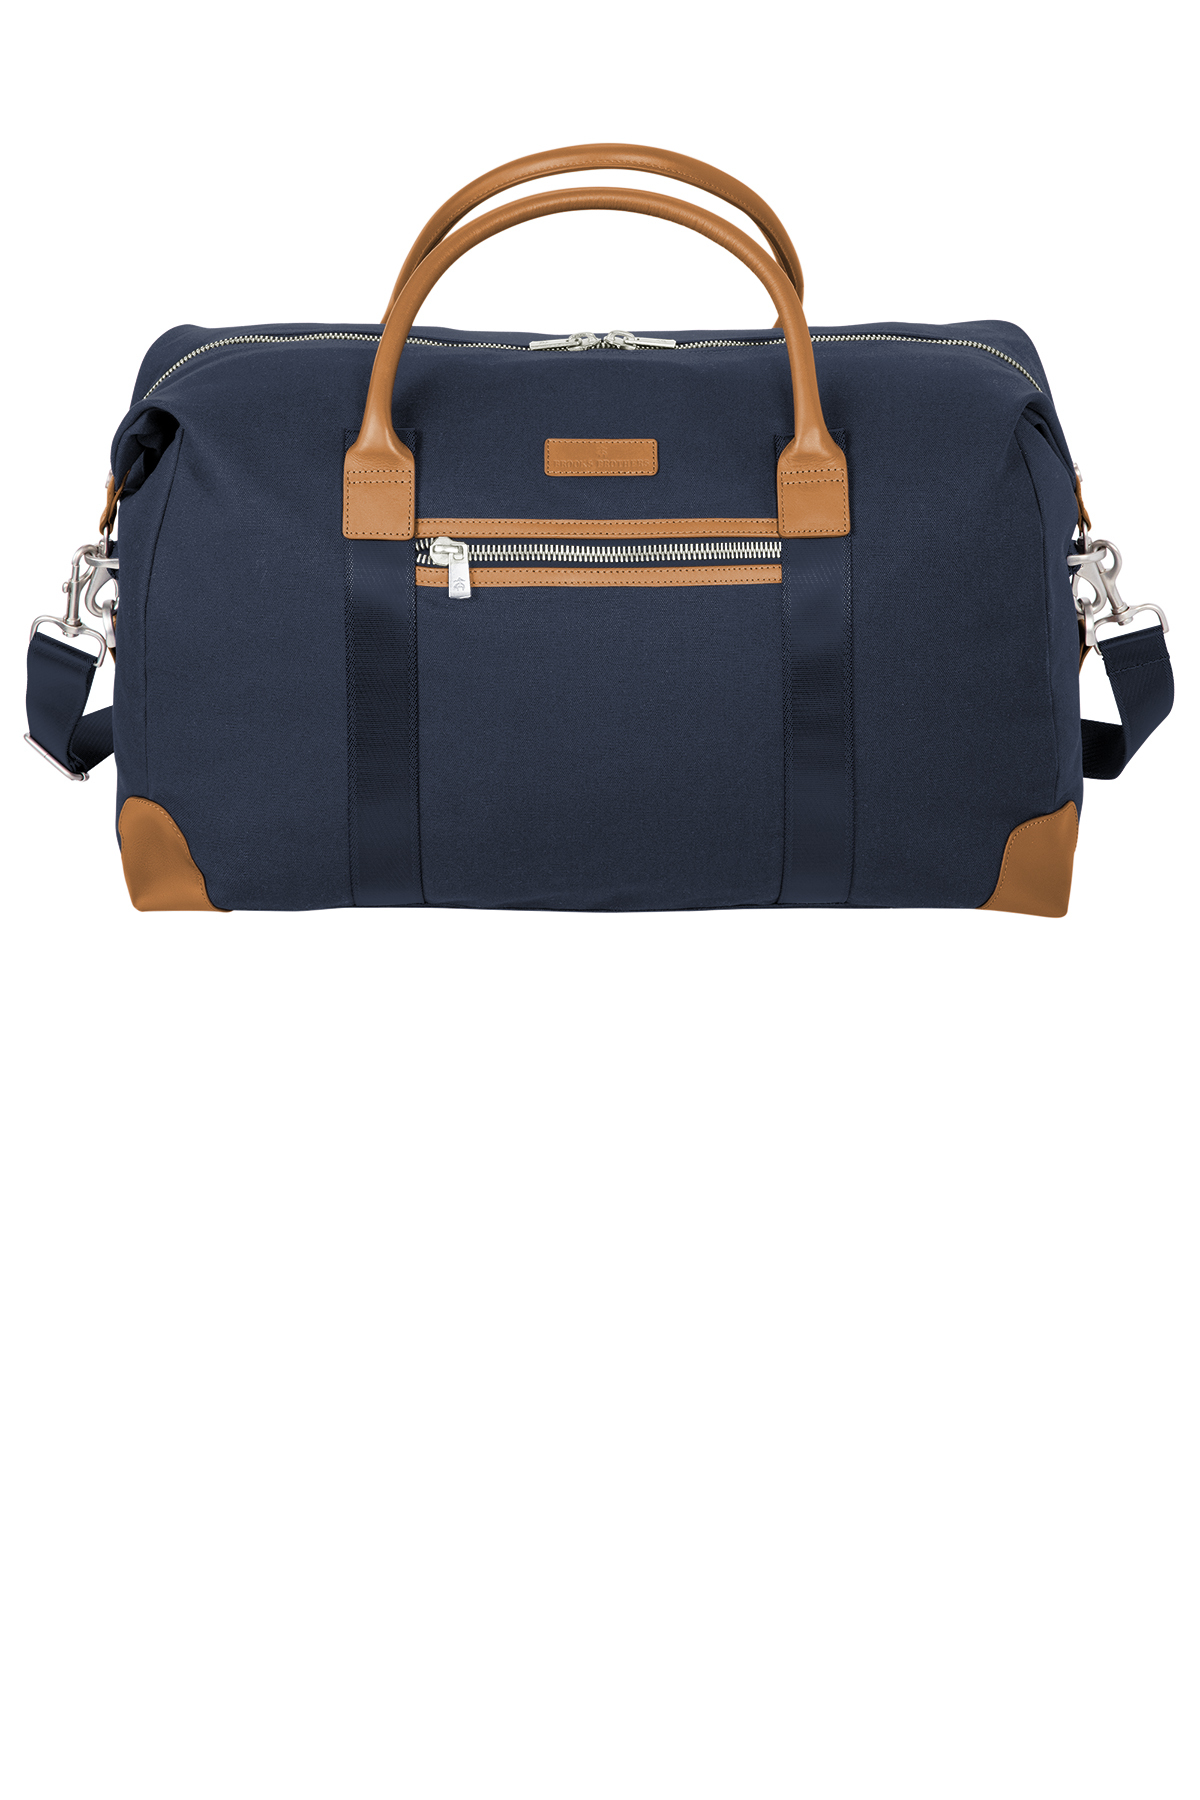 Brooks Brothers Wells Duffel | Product | Company Casuals